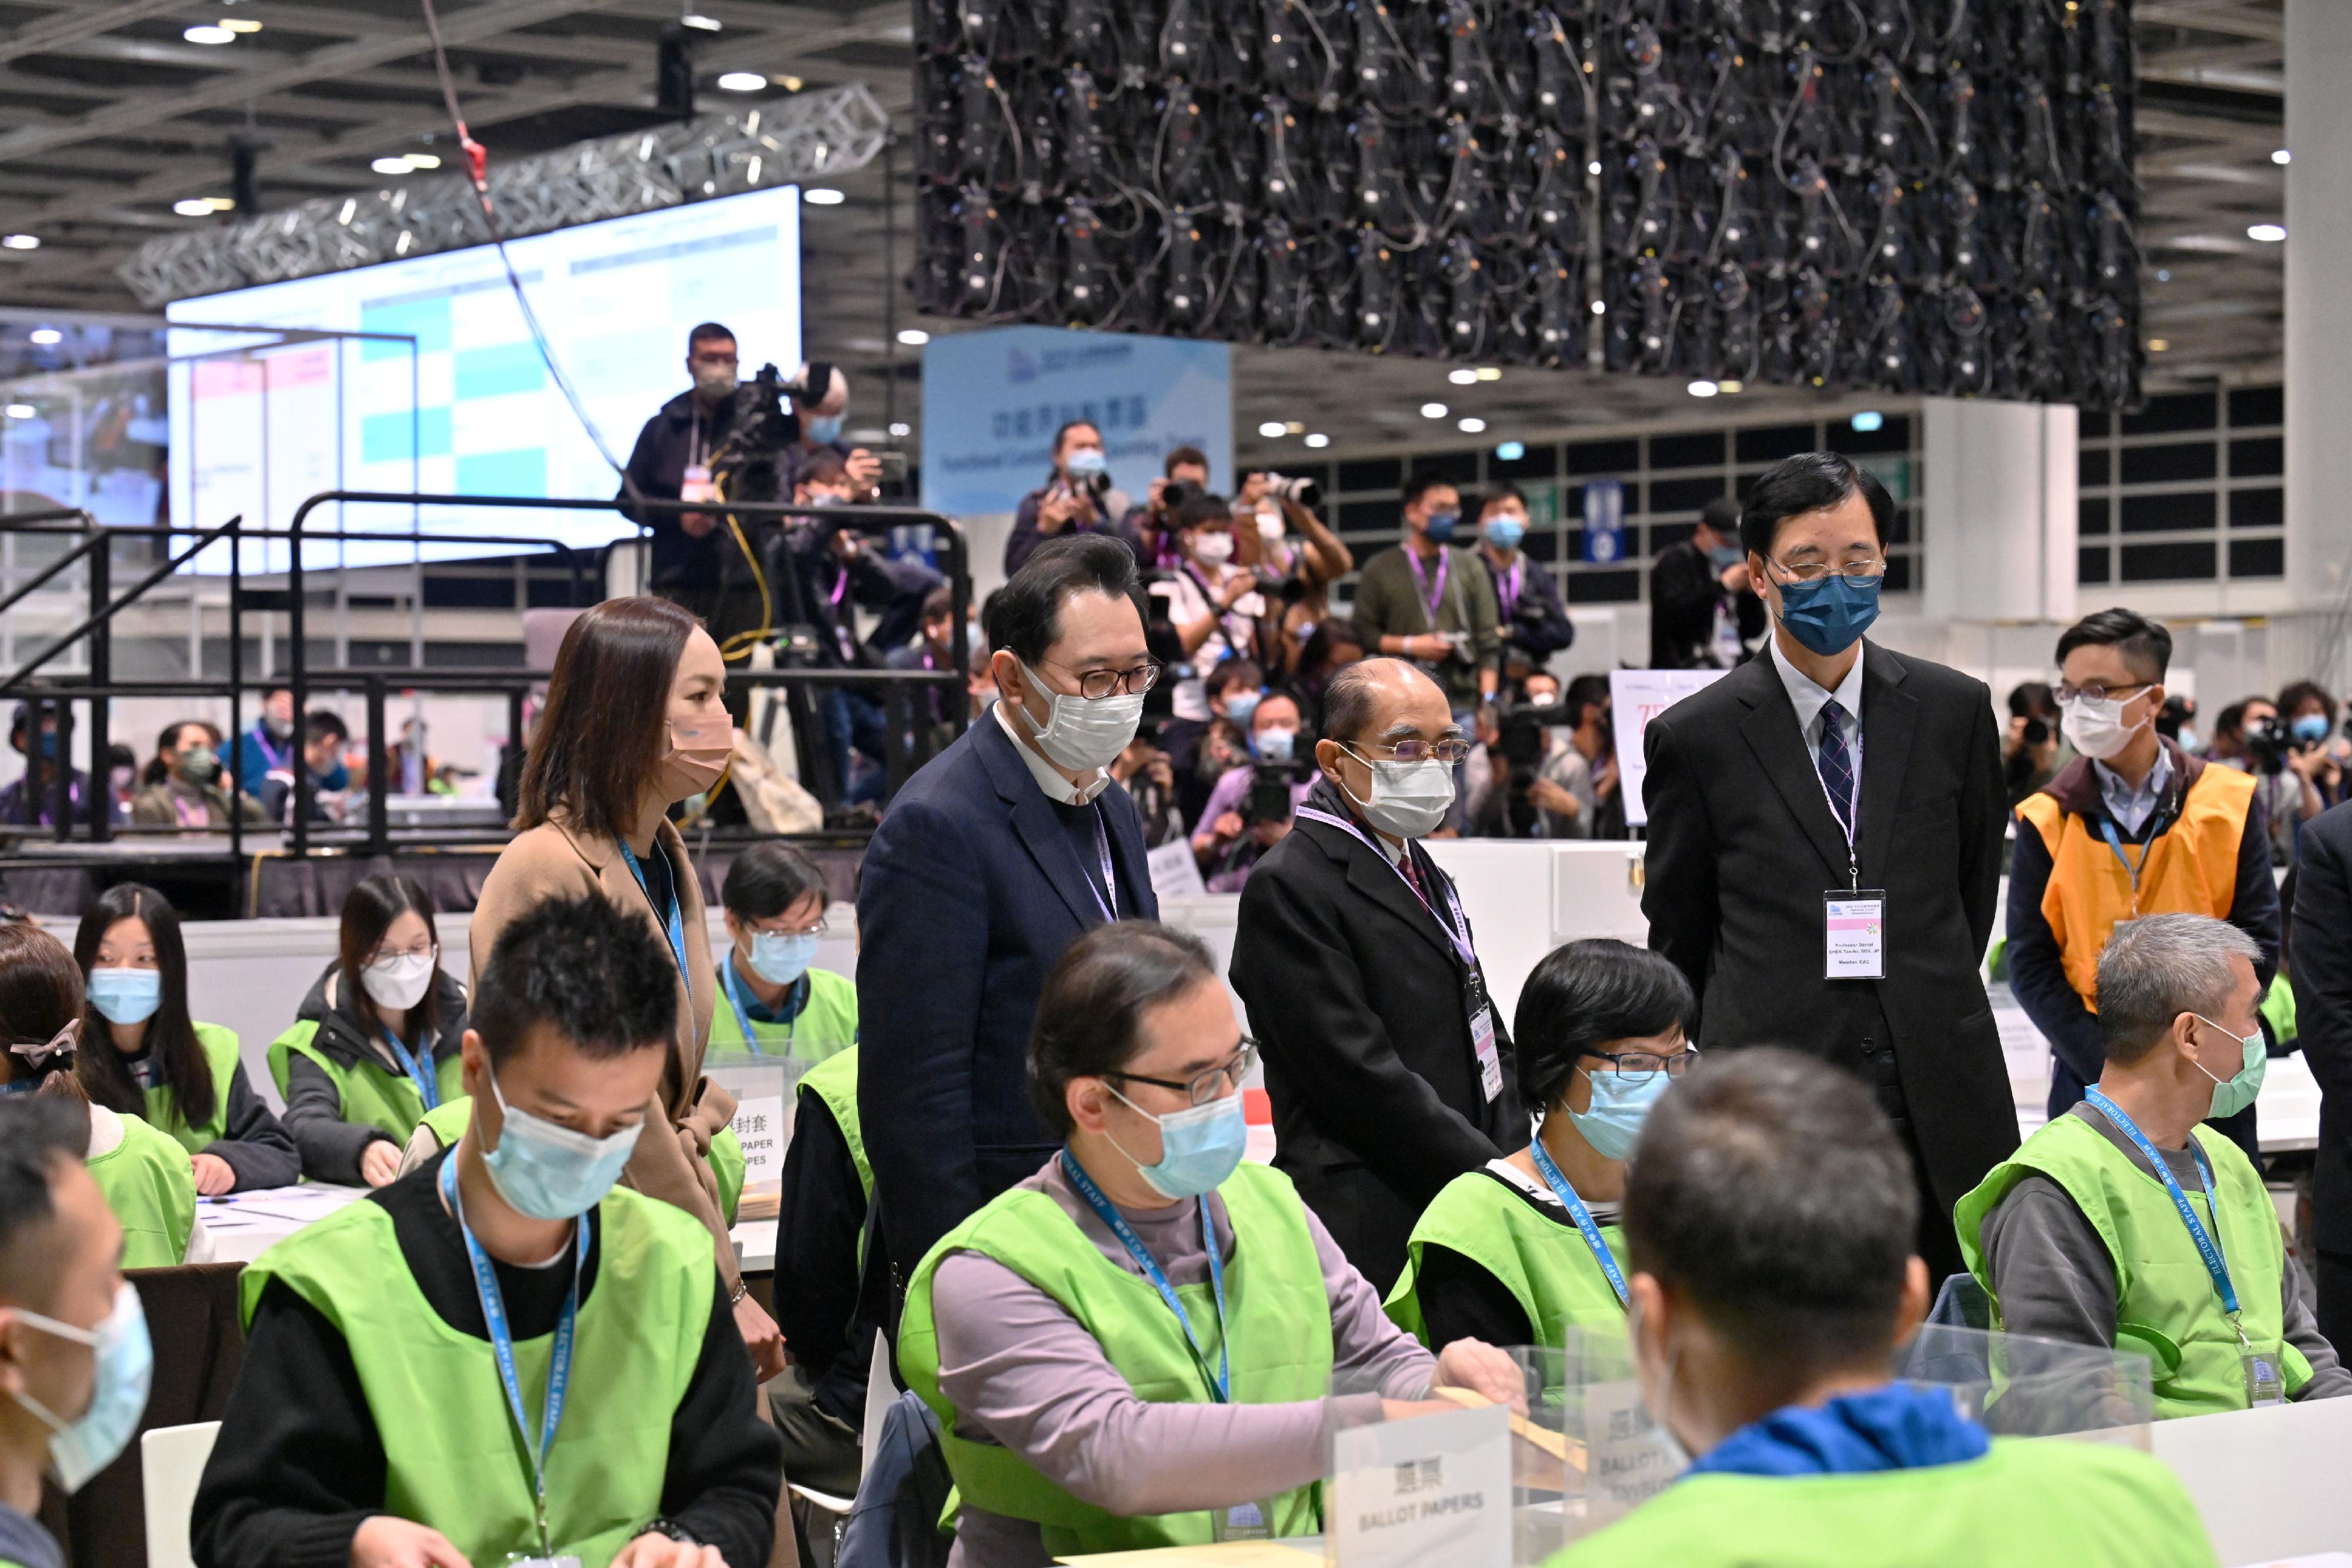 The Chairman of the Electoral Affairs Commission (EAC), Mr Justice Barnabas Fung Wah (second left), EAC members Mr Arthur Luk, SC (second right) and Professor Daniel Shek (first right) inspected the counting process at the central counting station at the Hong Kong Convention and Exhibition Centre for the 2021 Legislative Council General Election last night (December 19).